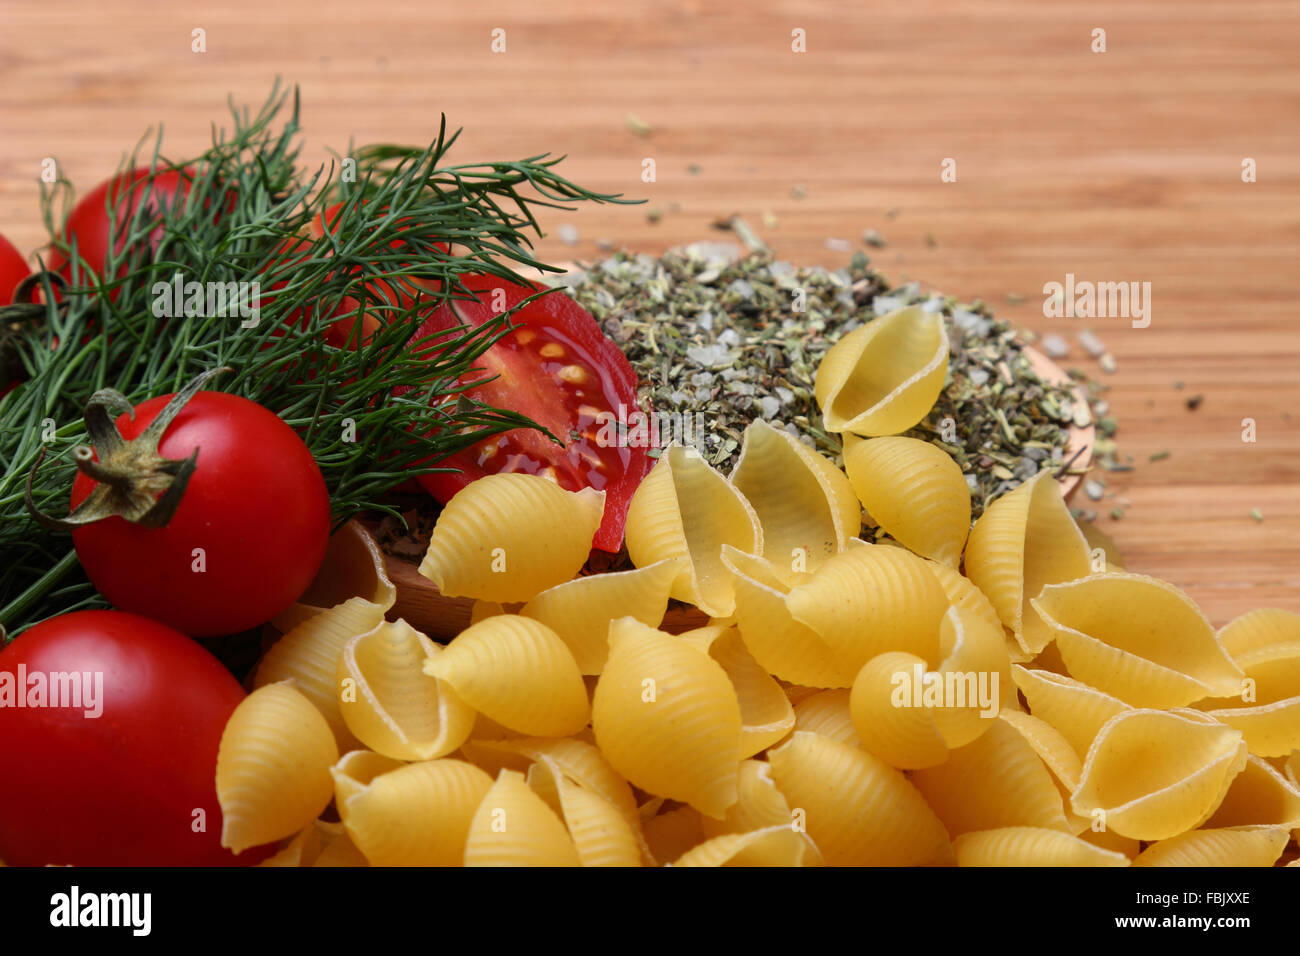 Pasta, tomatoes and spices on wooden table background Stock Photo